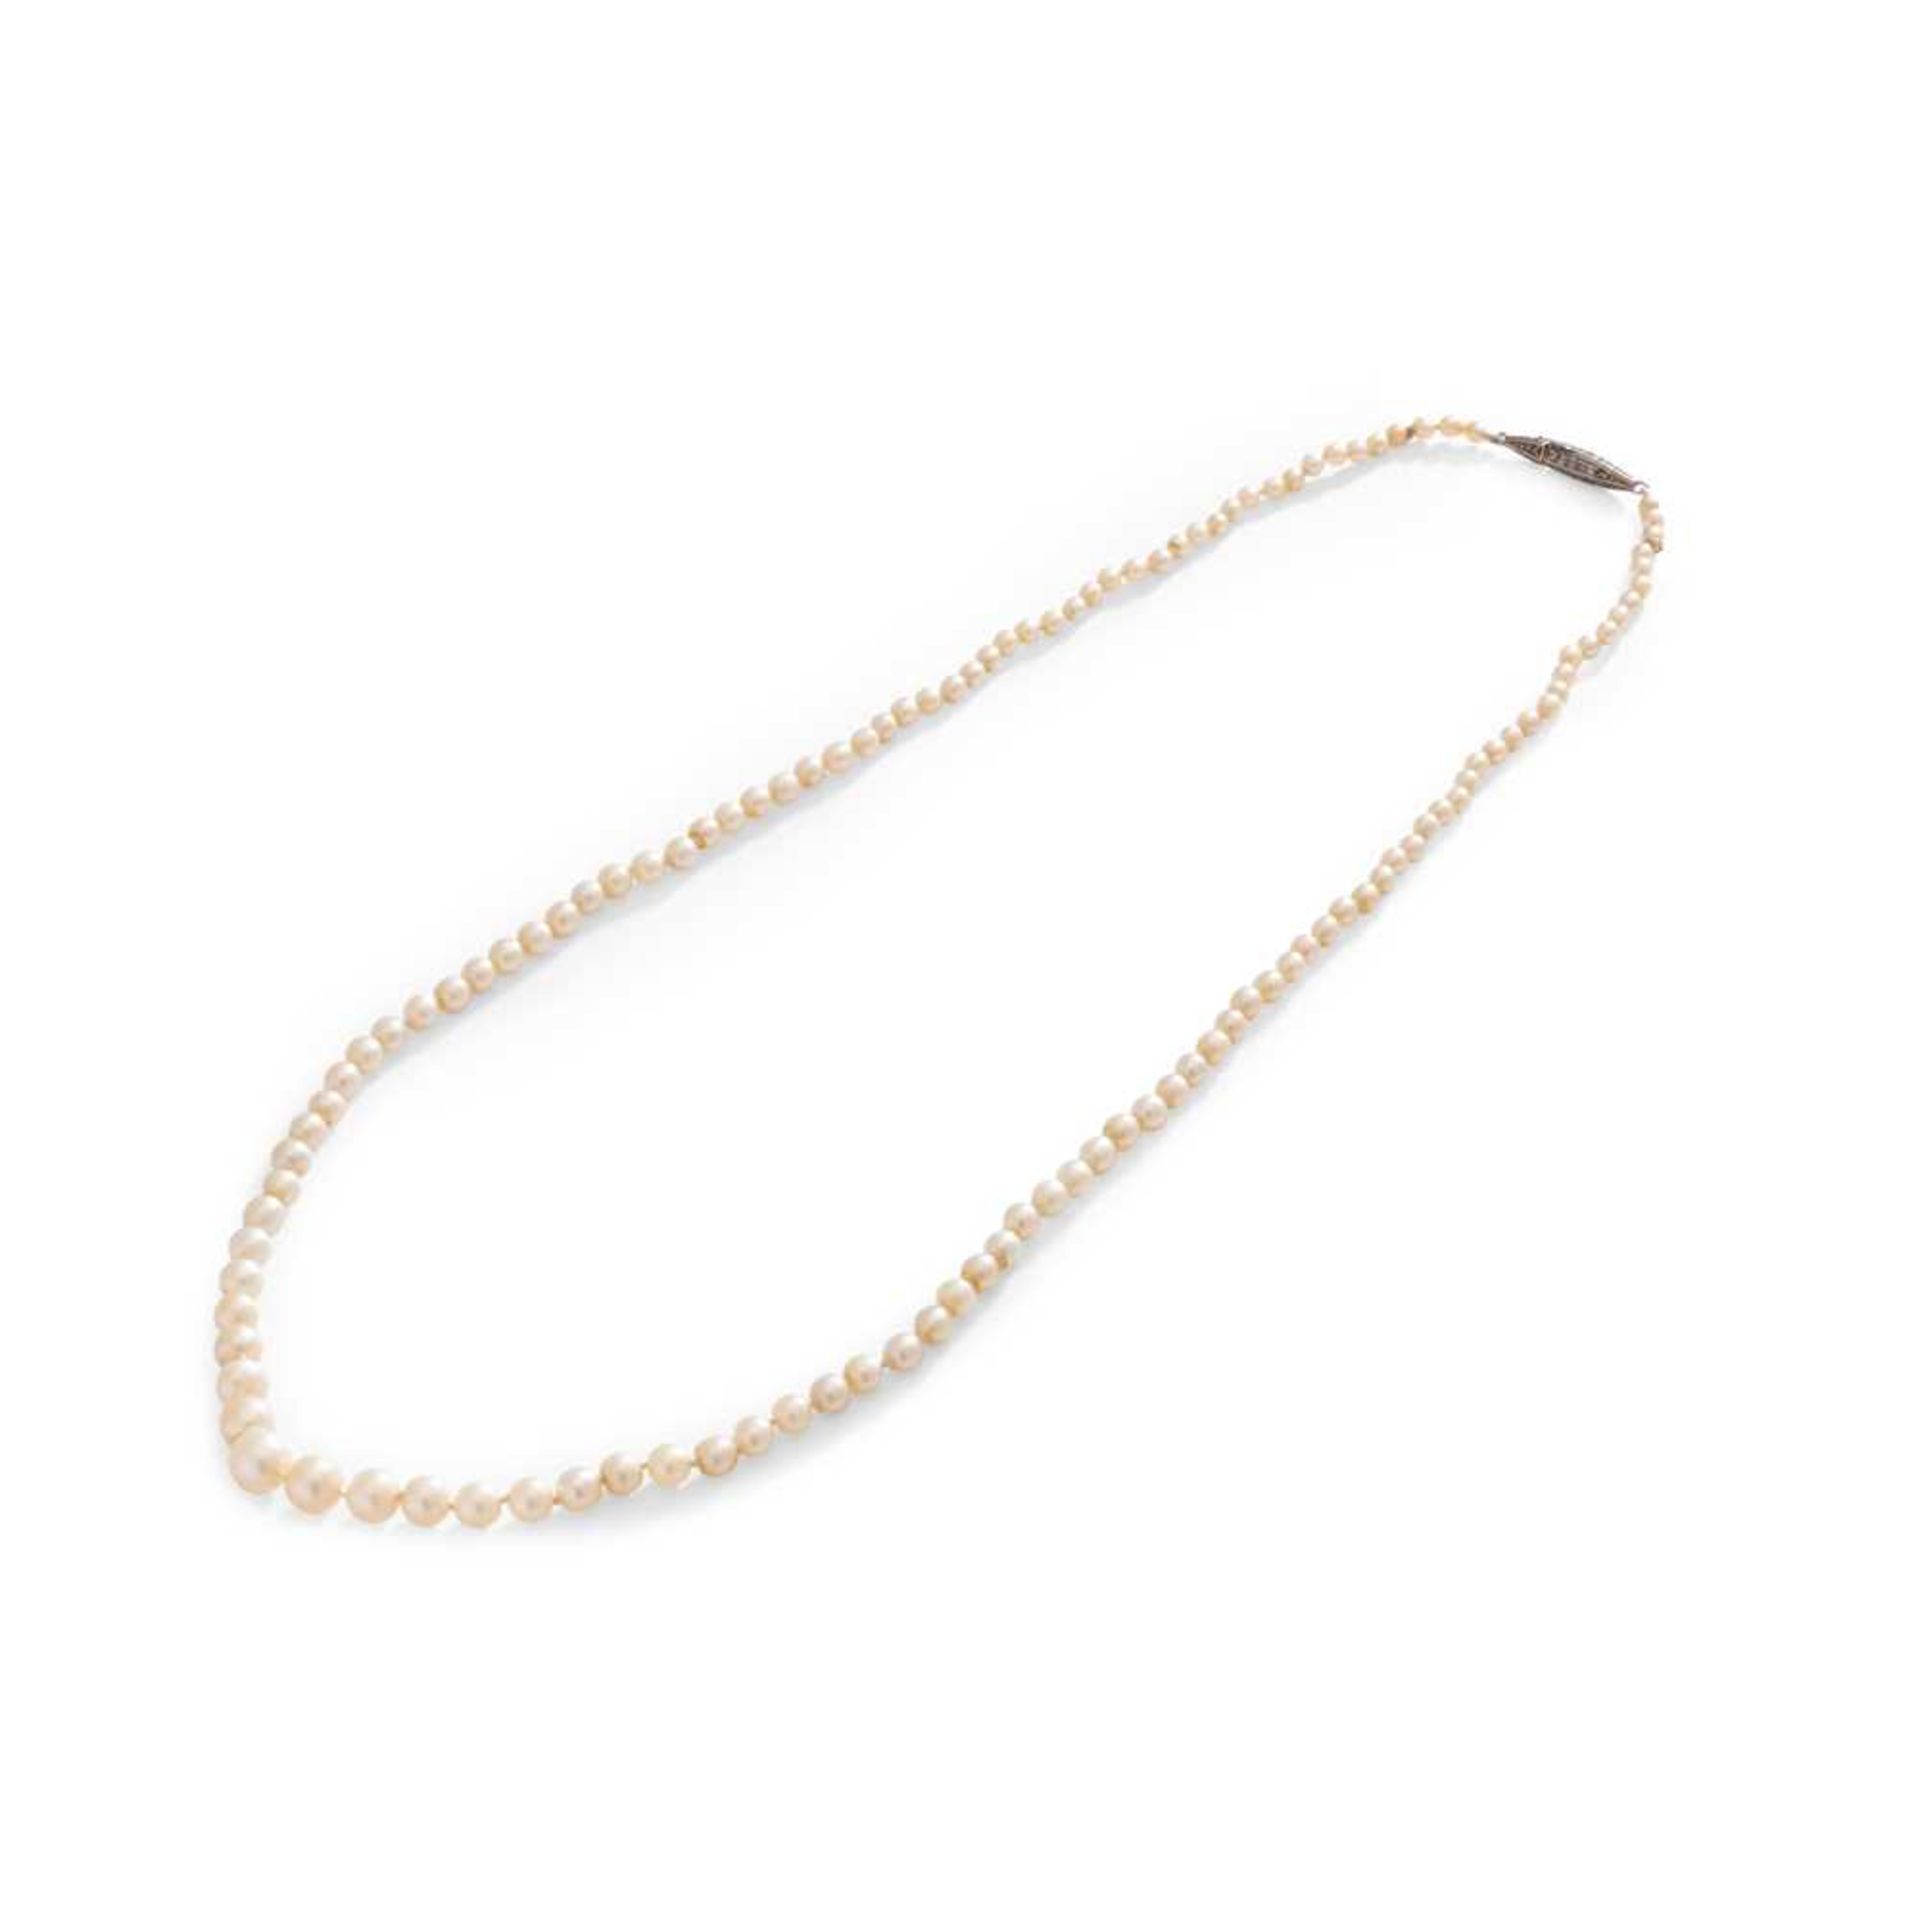 A natural saltwater pearl necklace